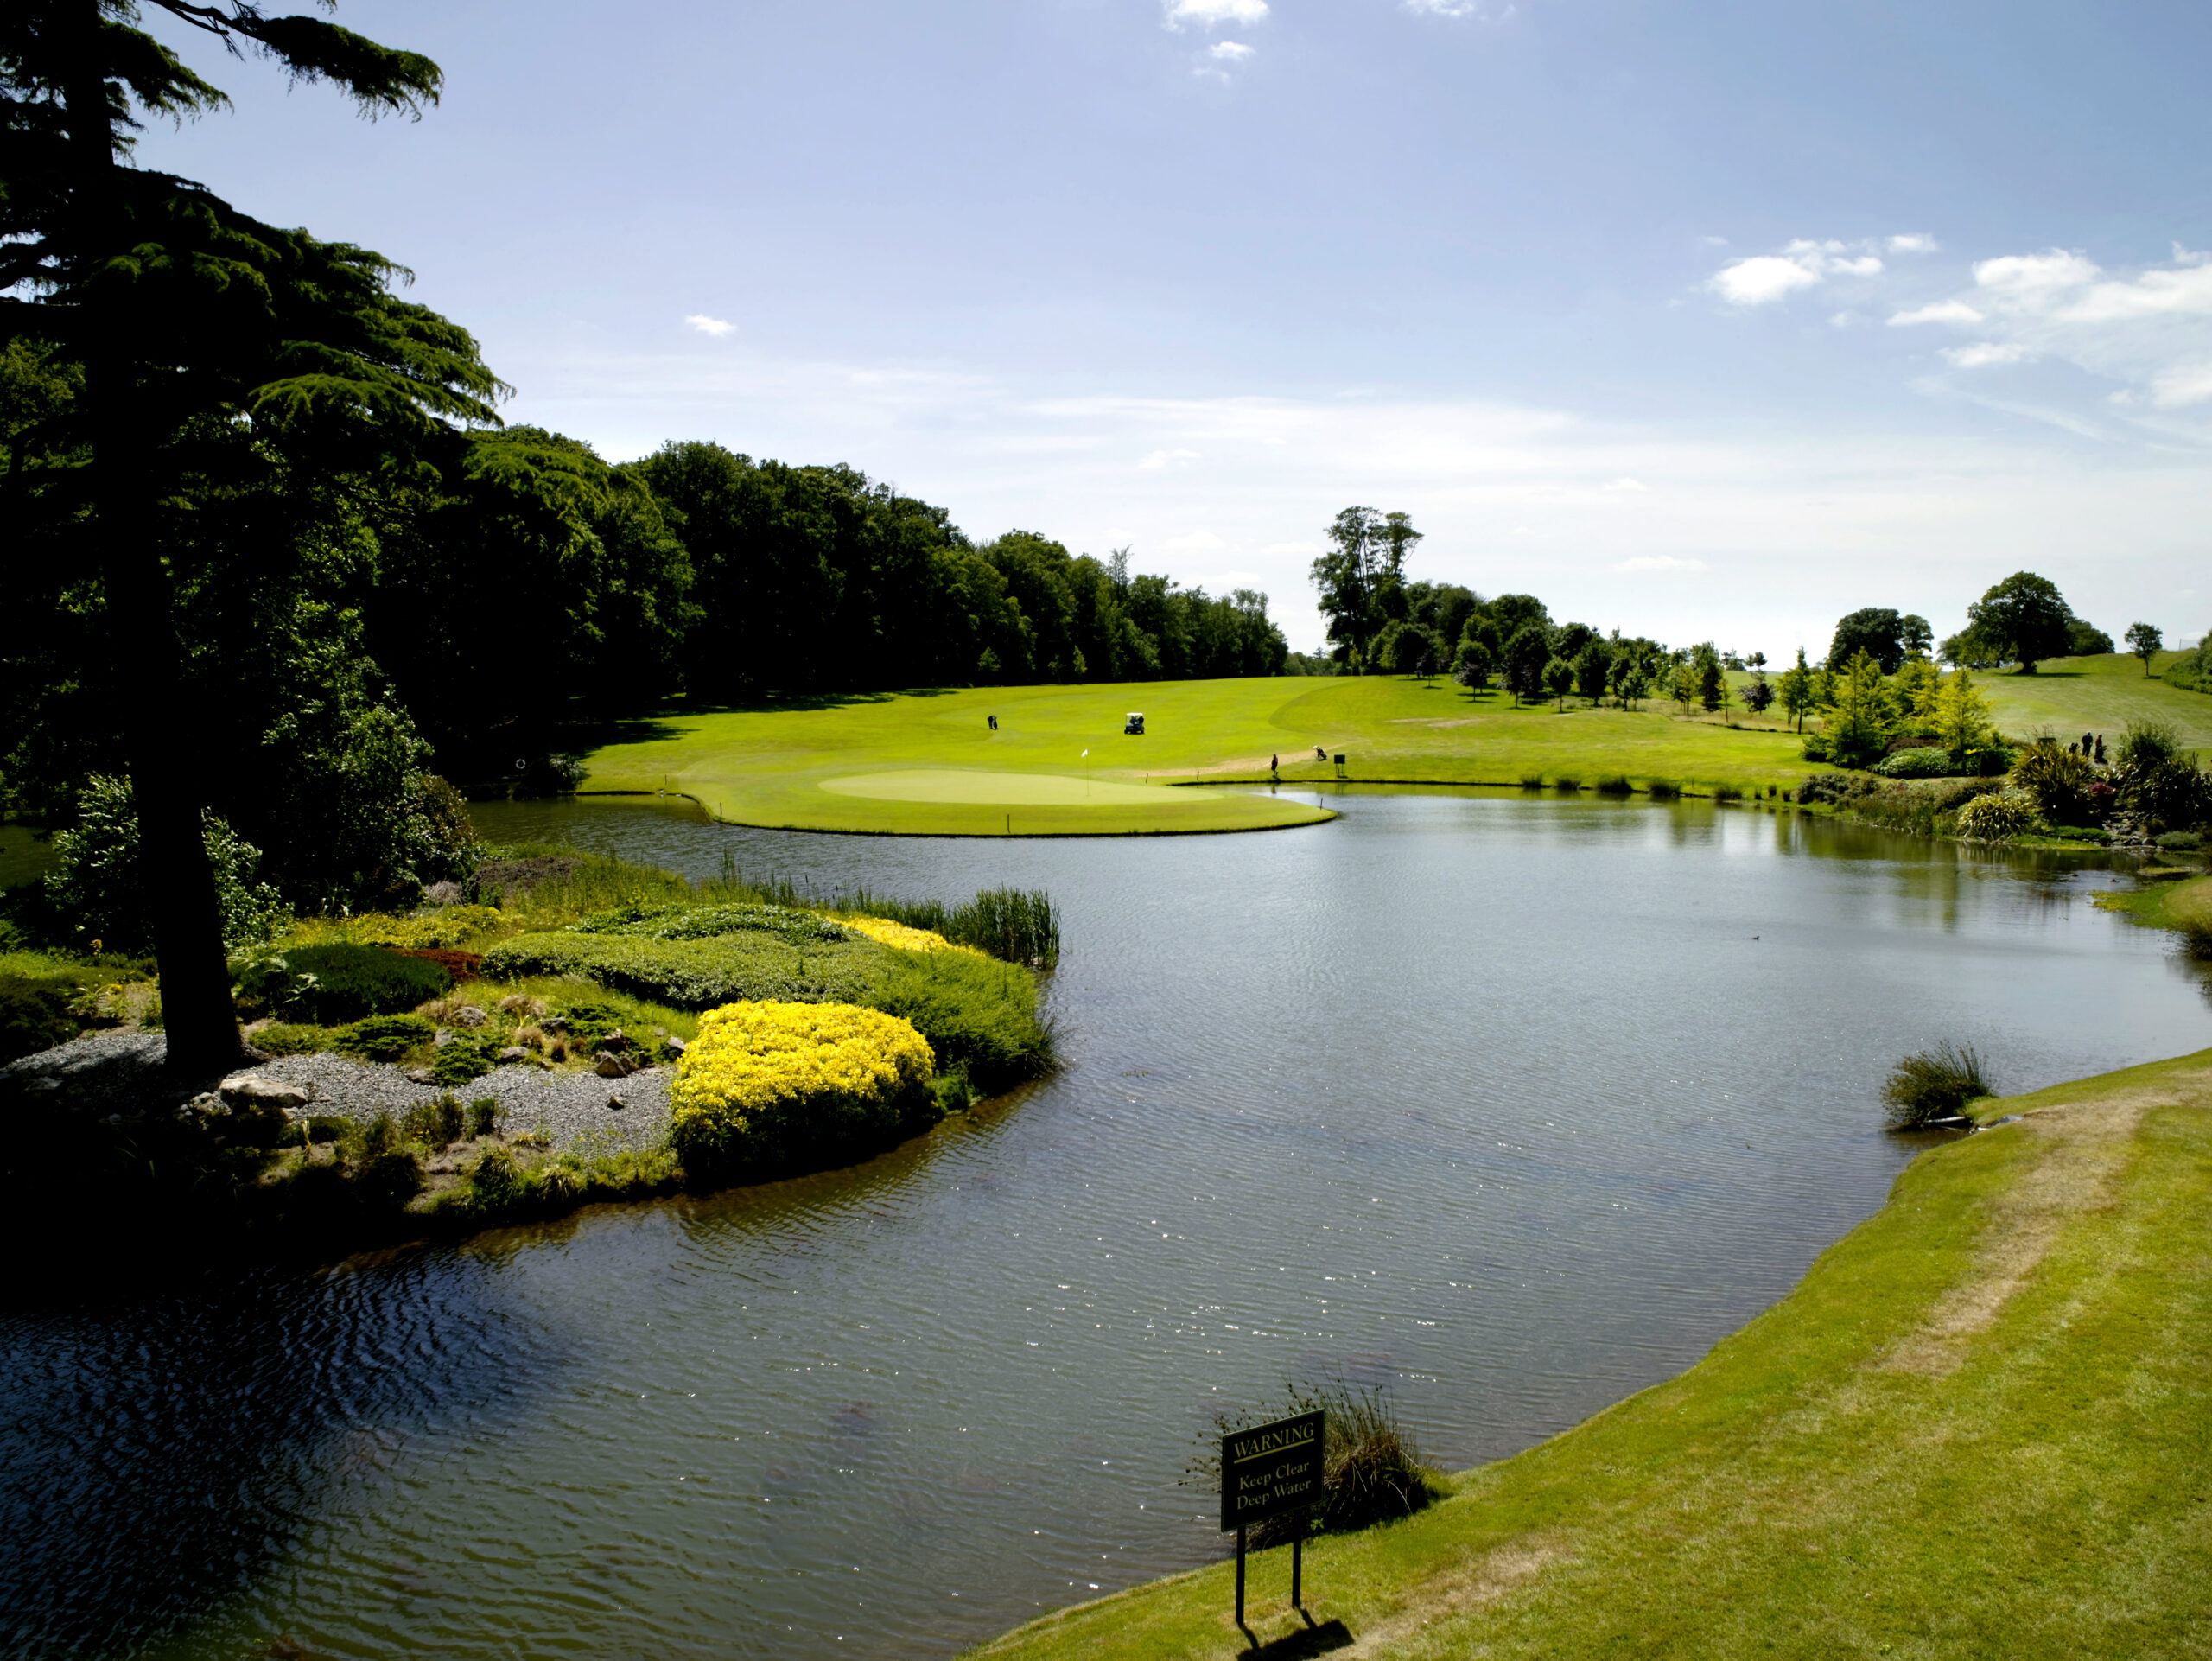 Fota island resort, a view of a lake, bright green grass and trees.